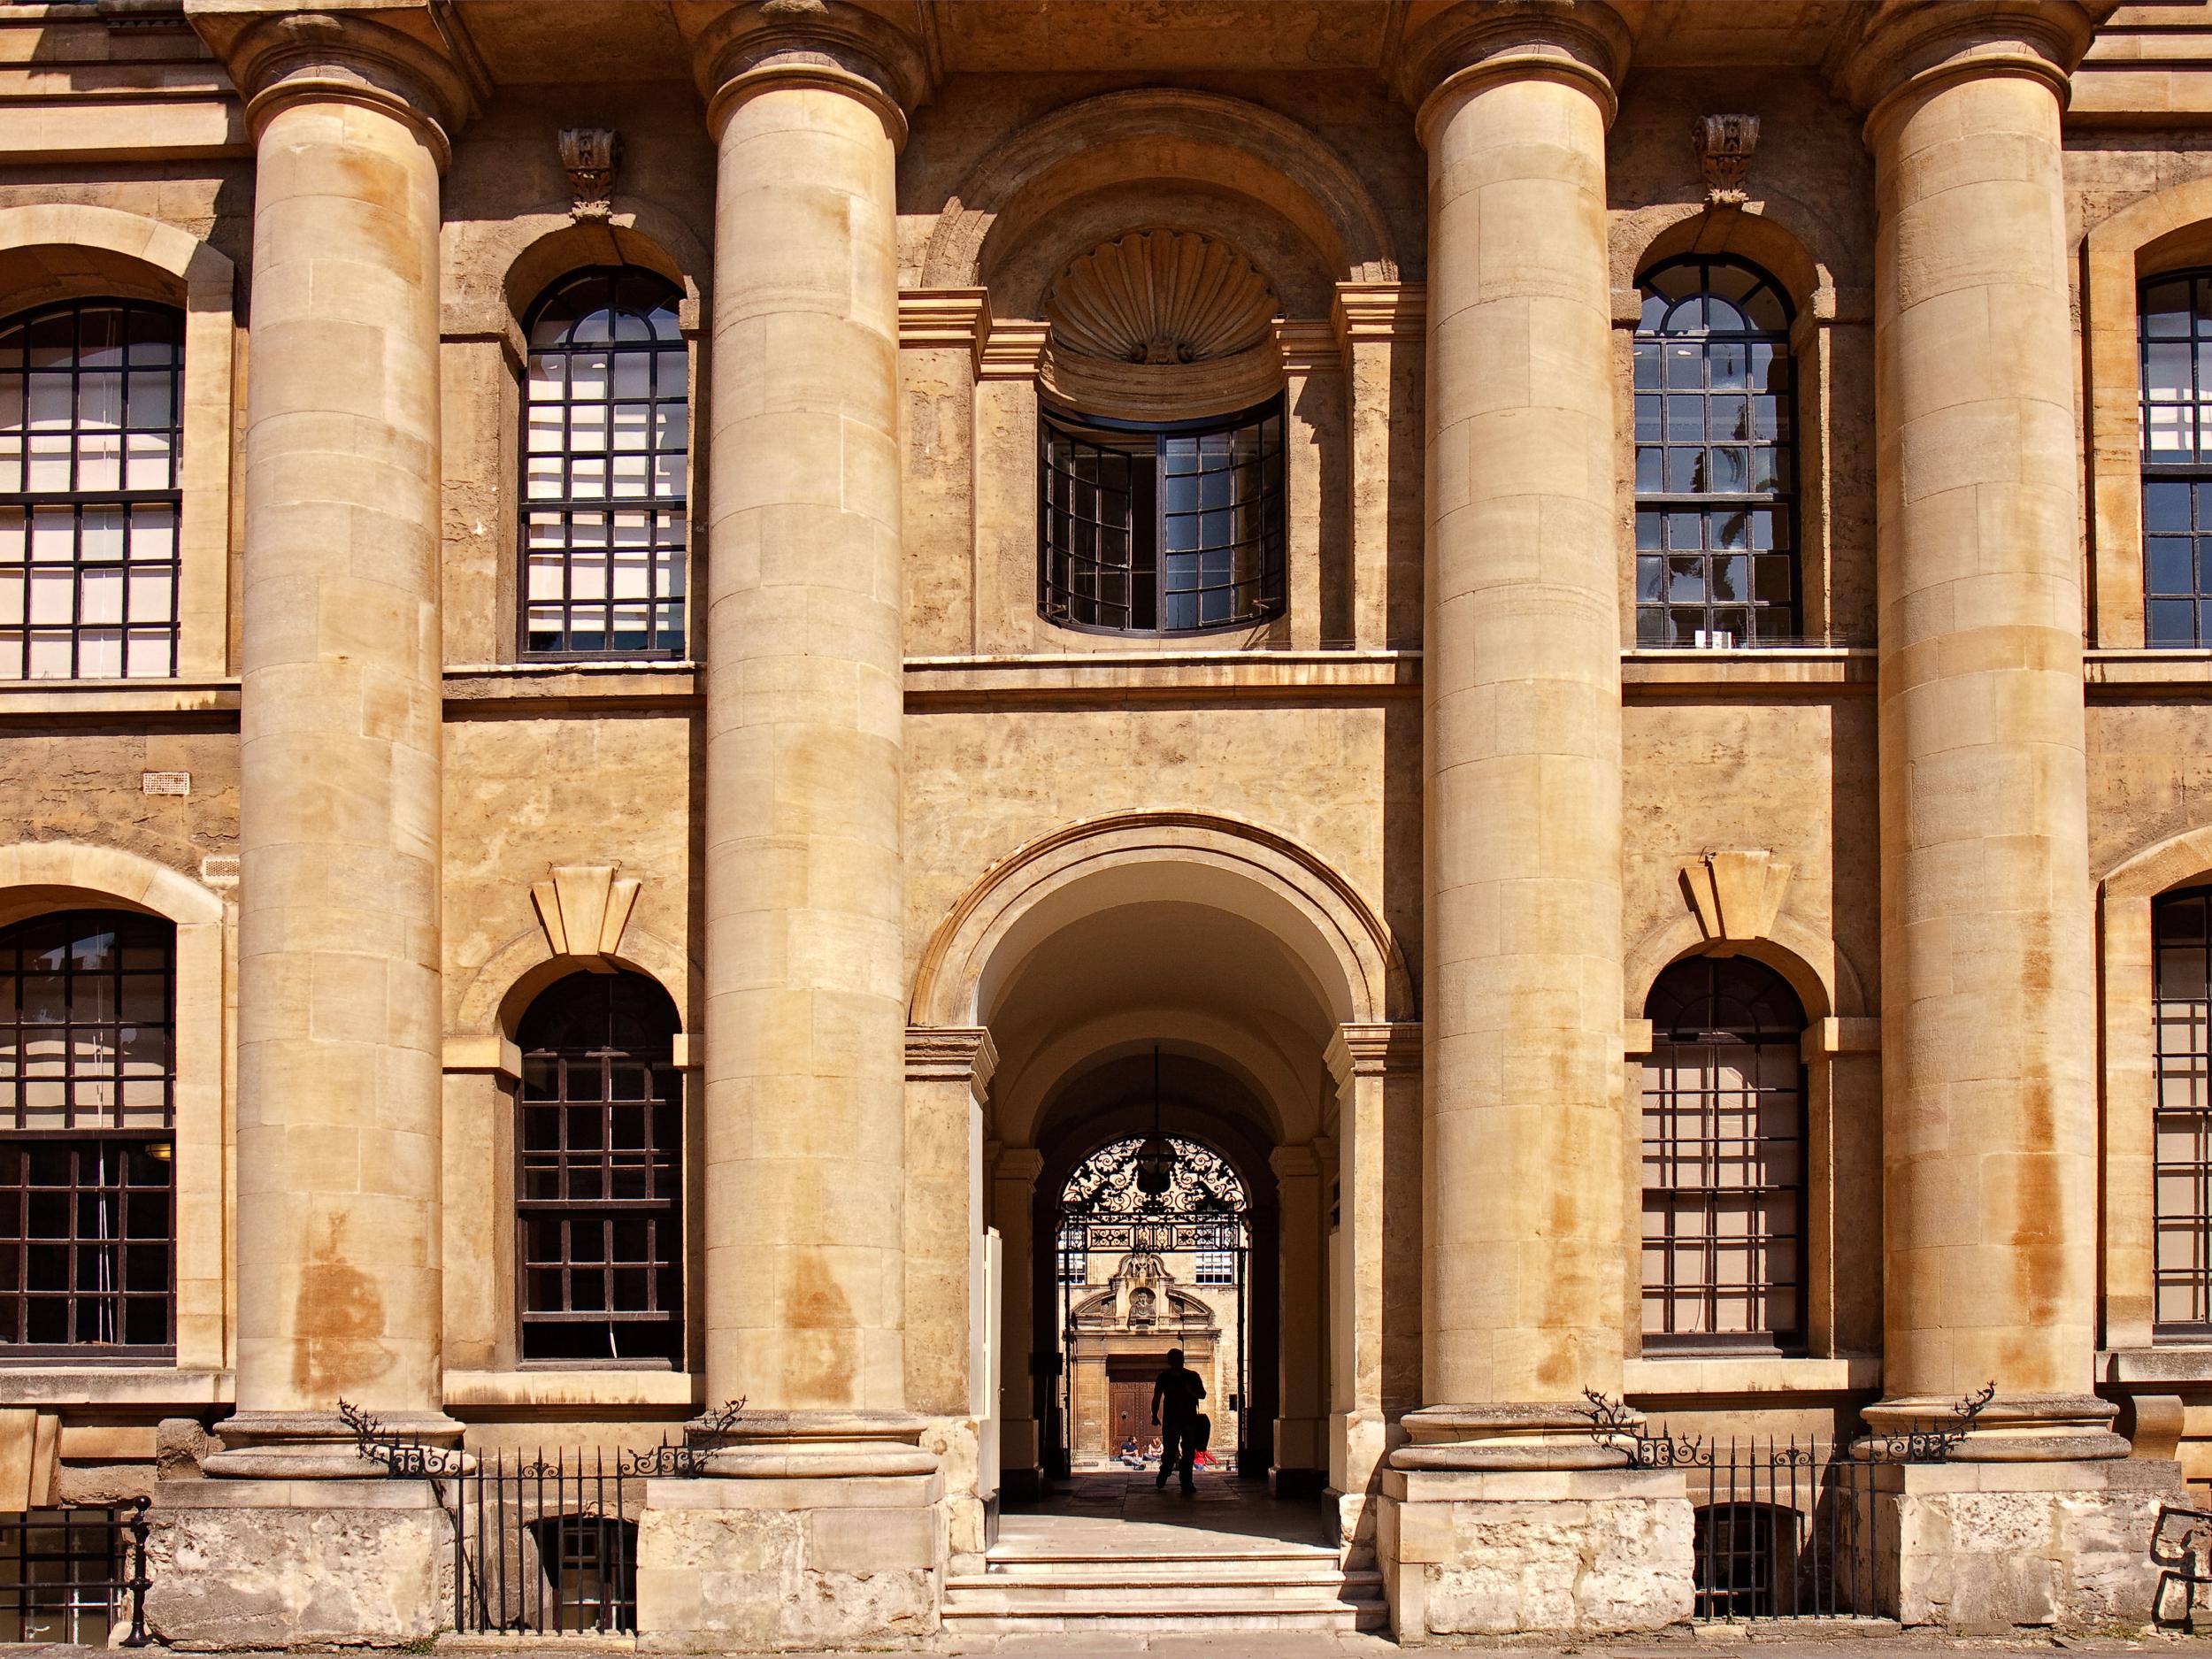 The Clarendon Building is a Grade I listed neoclassical building that dates back to the 18th Century and is next to Oxford University’s iconic Bodleian Library